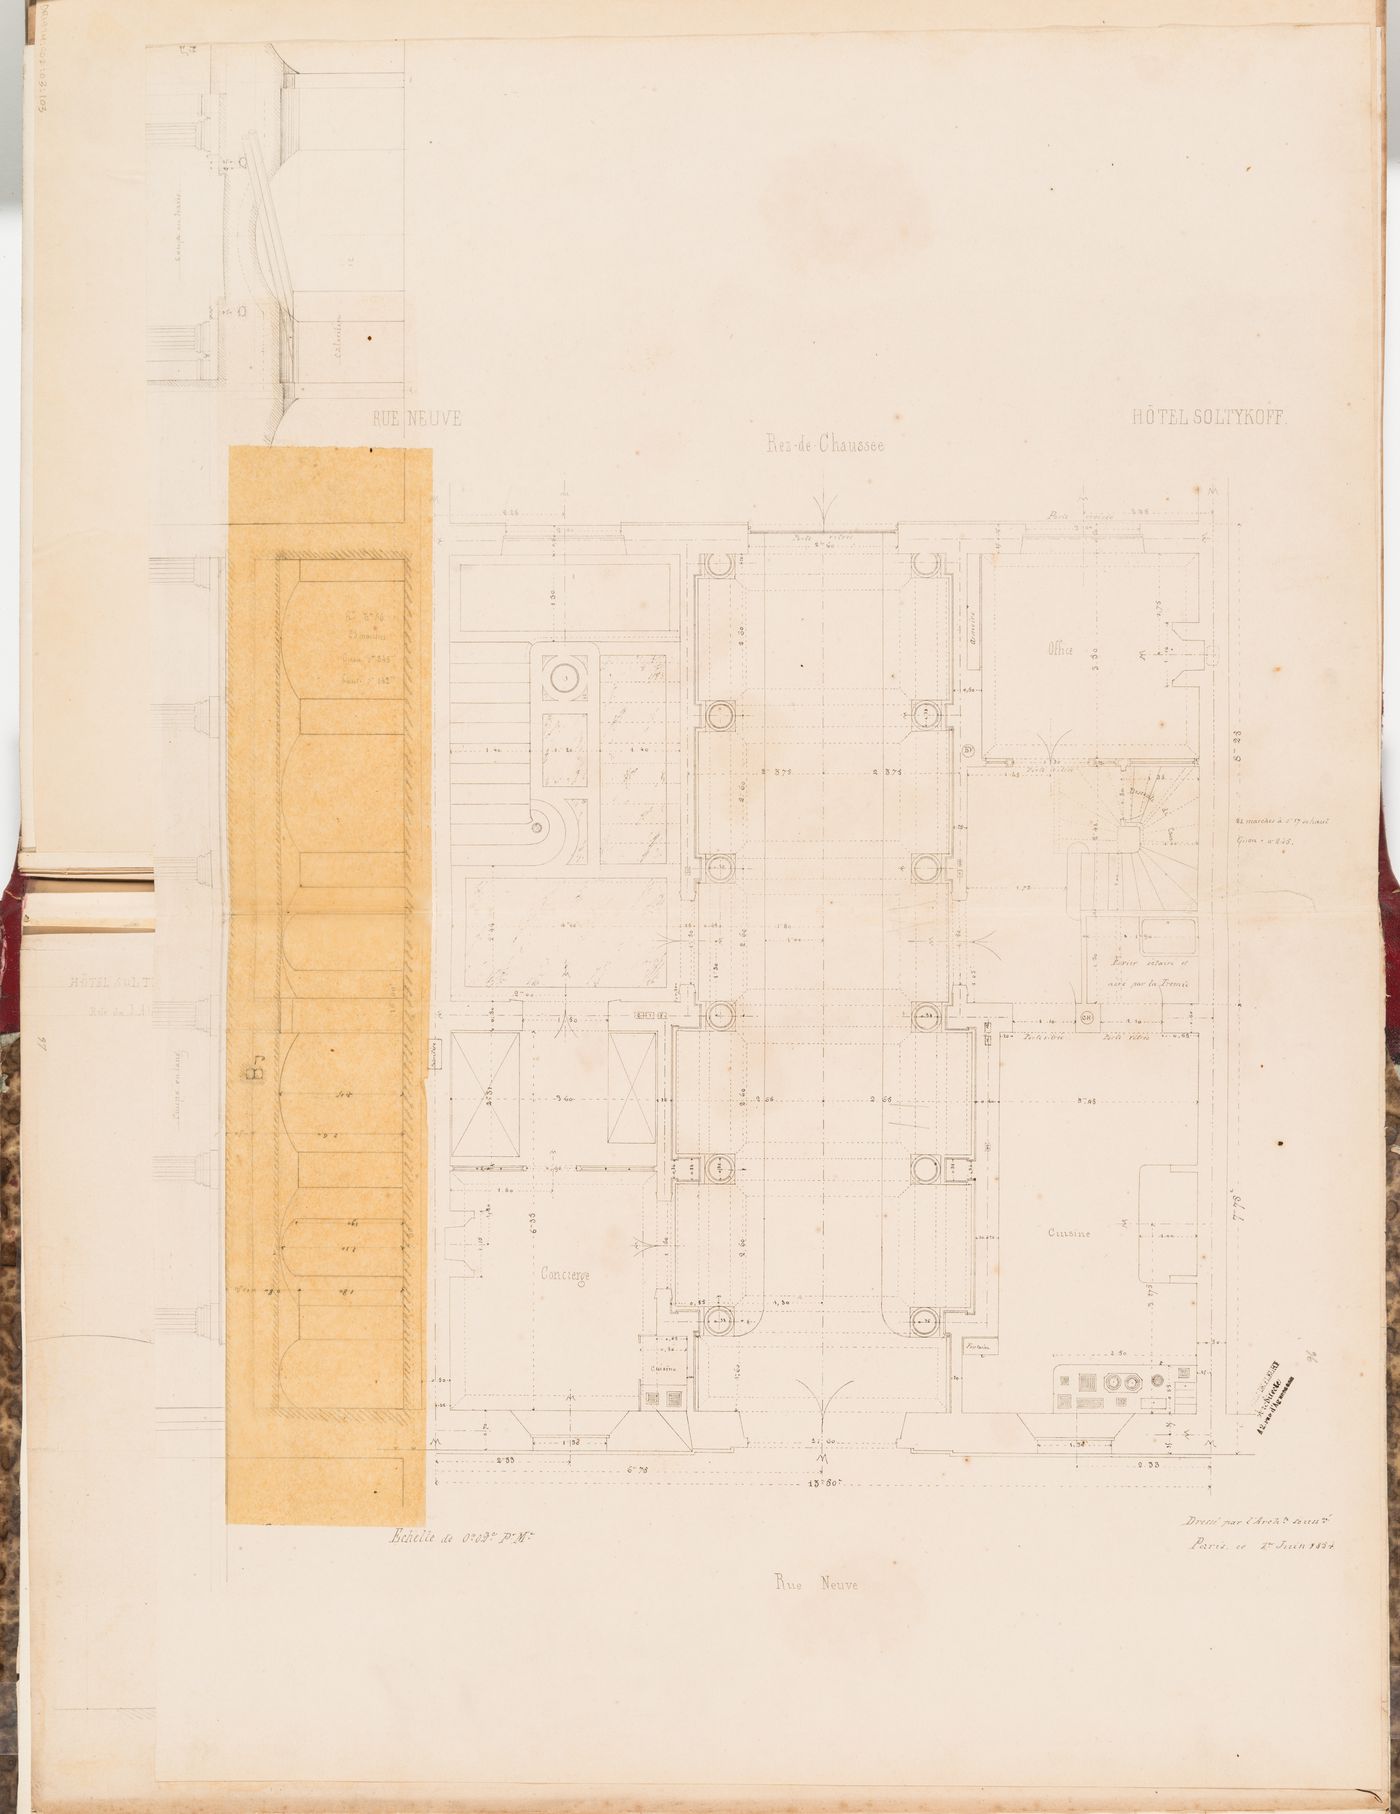 Section for the "caves" and ground floor plan for Hôtel Soltykoff